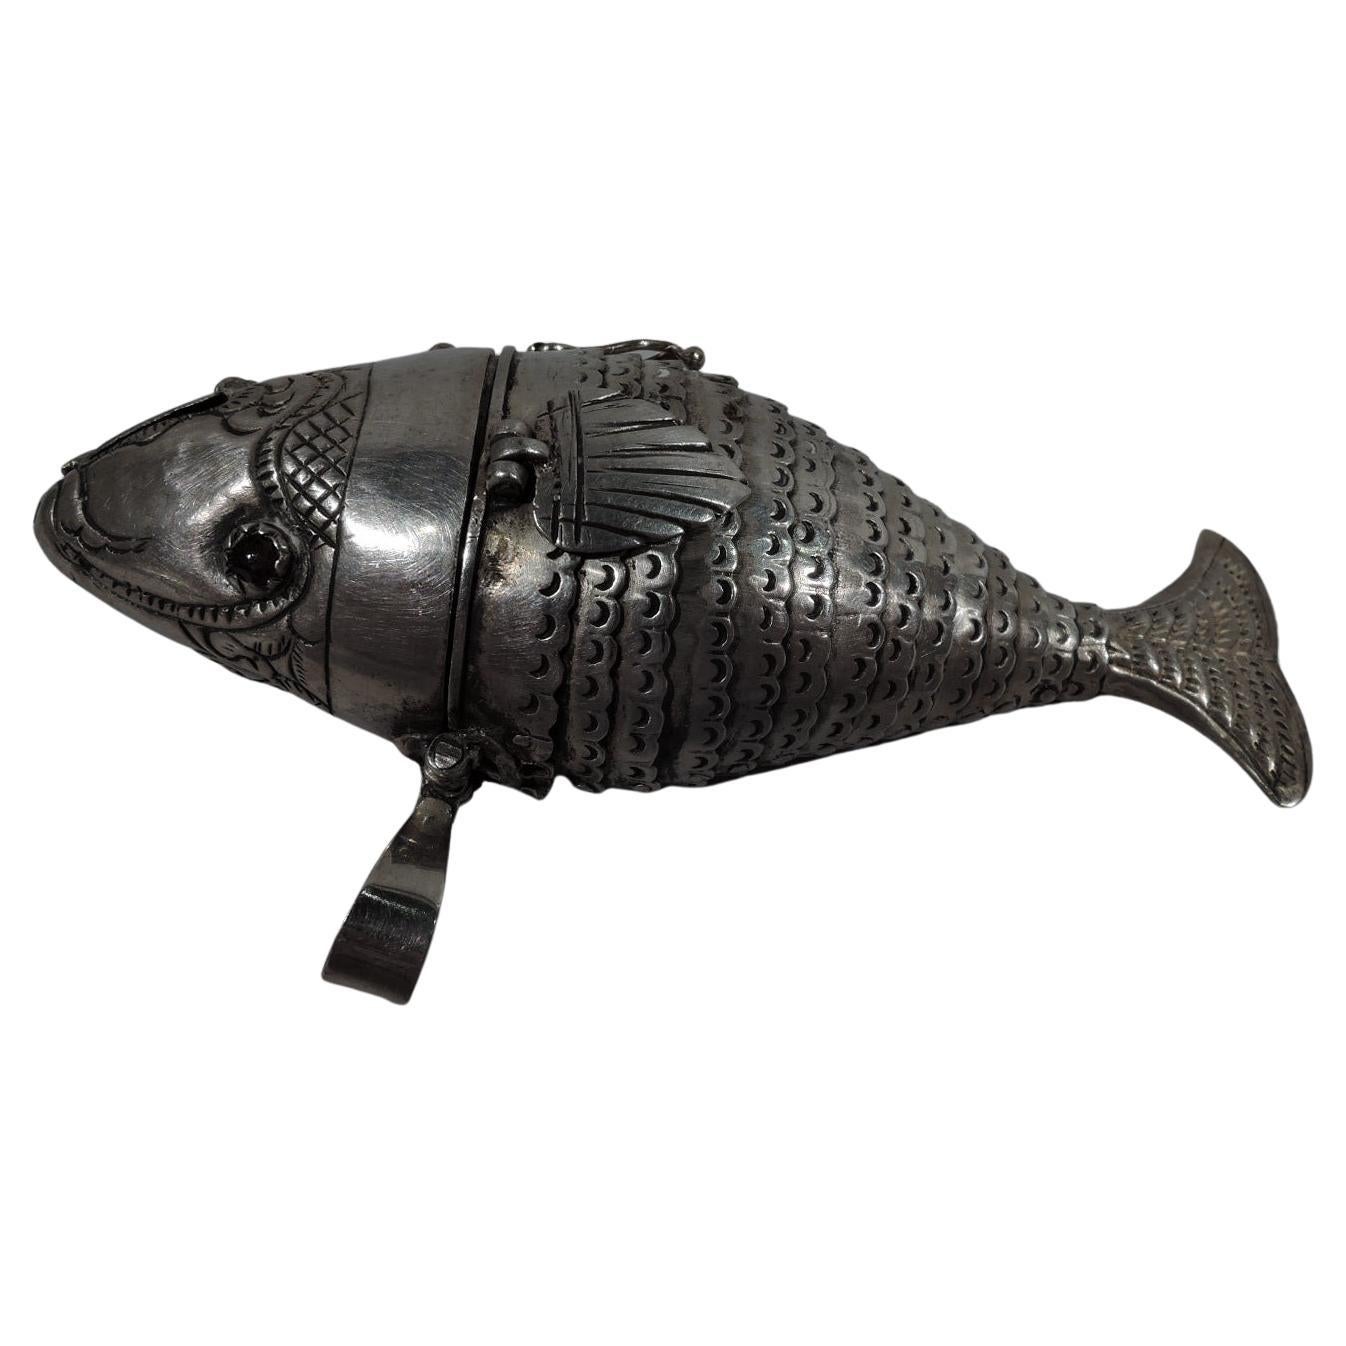 European Japonesque Silver Spice Box in Form of Articulated Fish